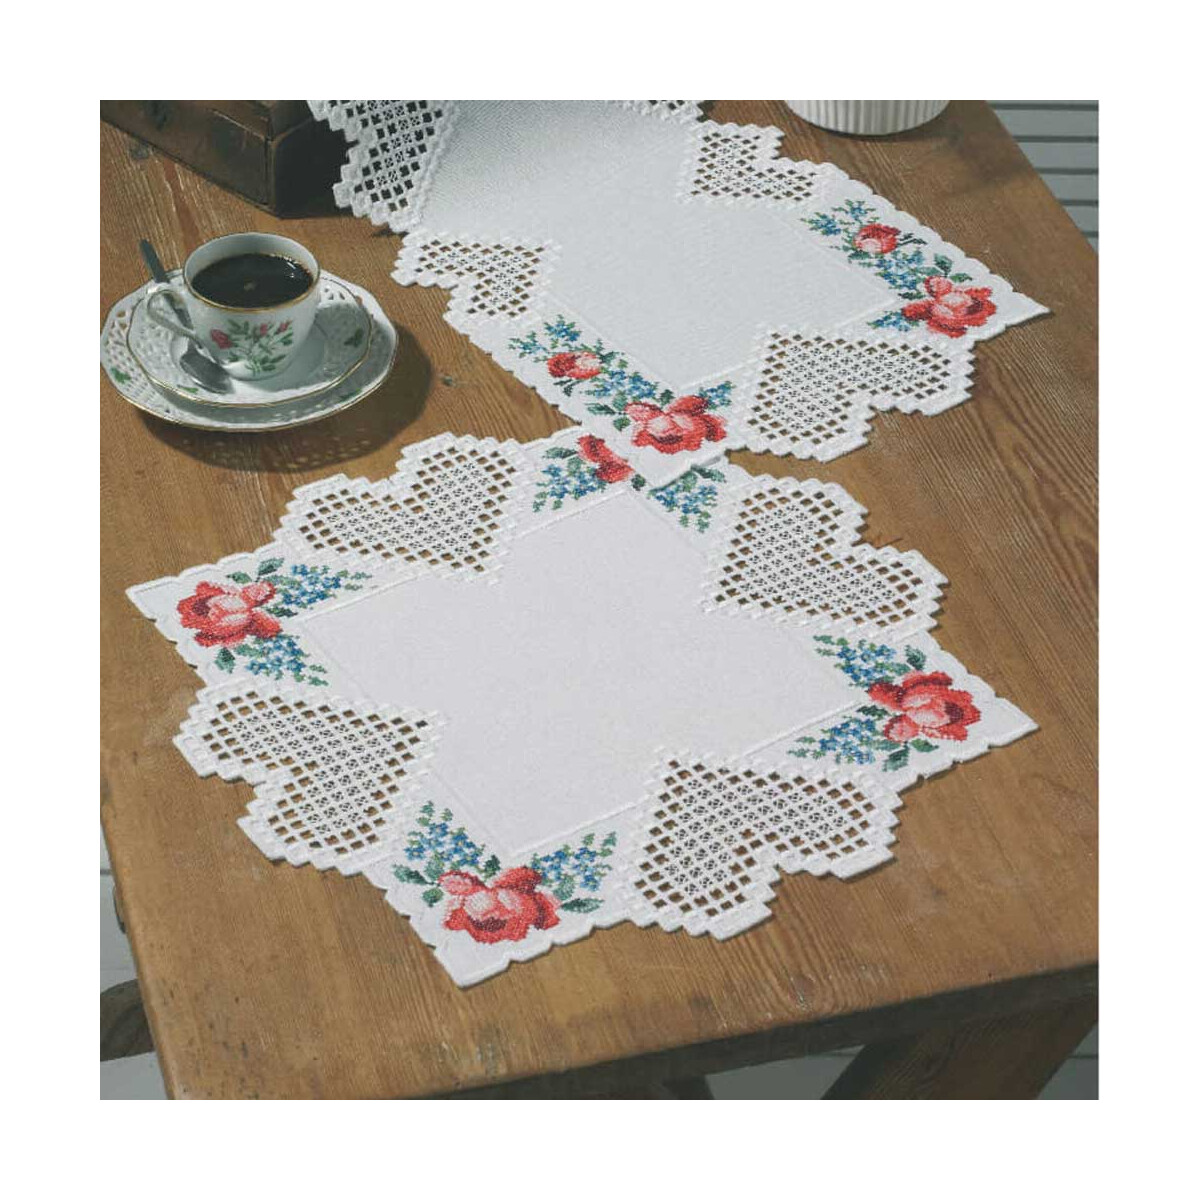 Permin counted Hardanger tablecloth stitch kit...